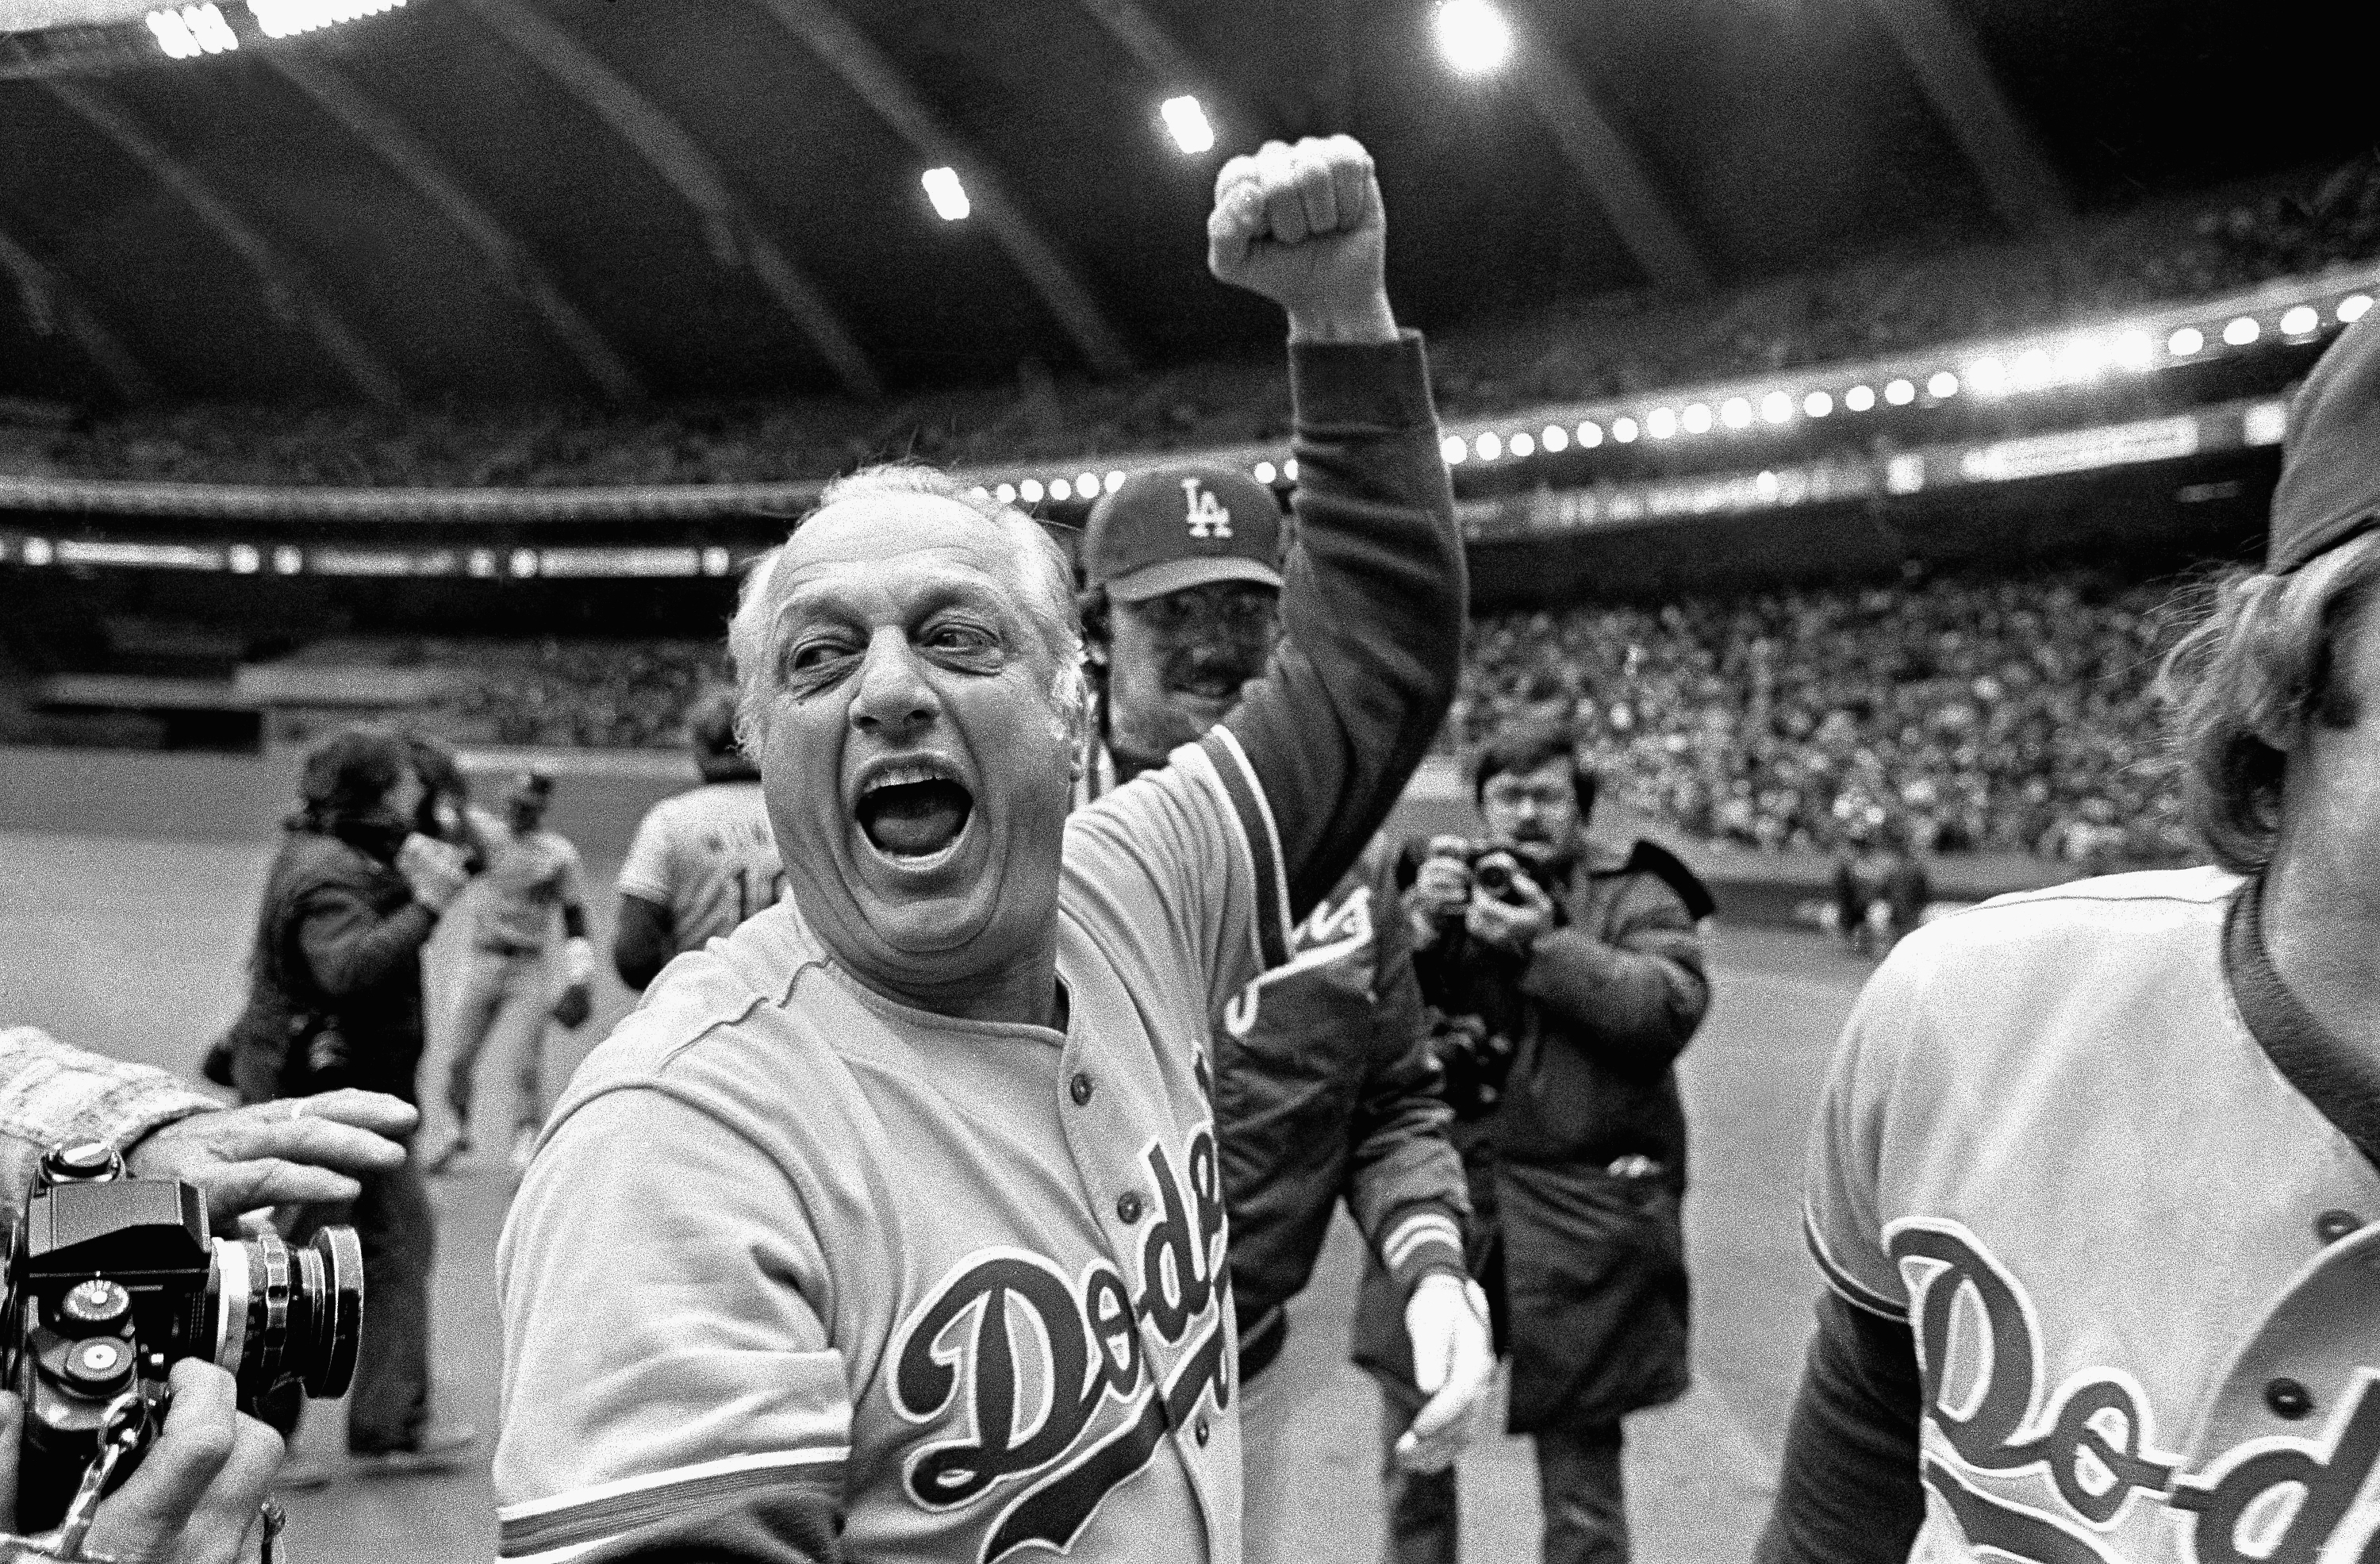 How to Lunch Like Dodgers Savior Tommy Lasorda